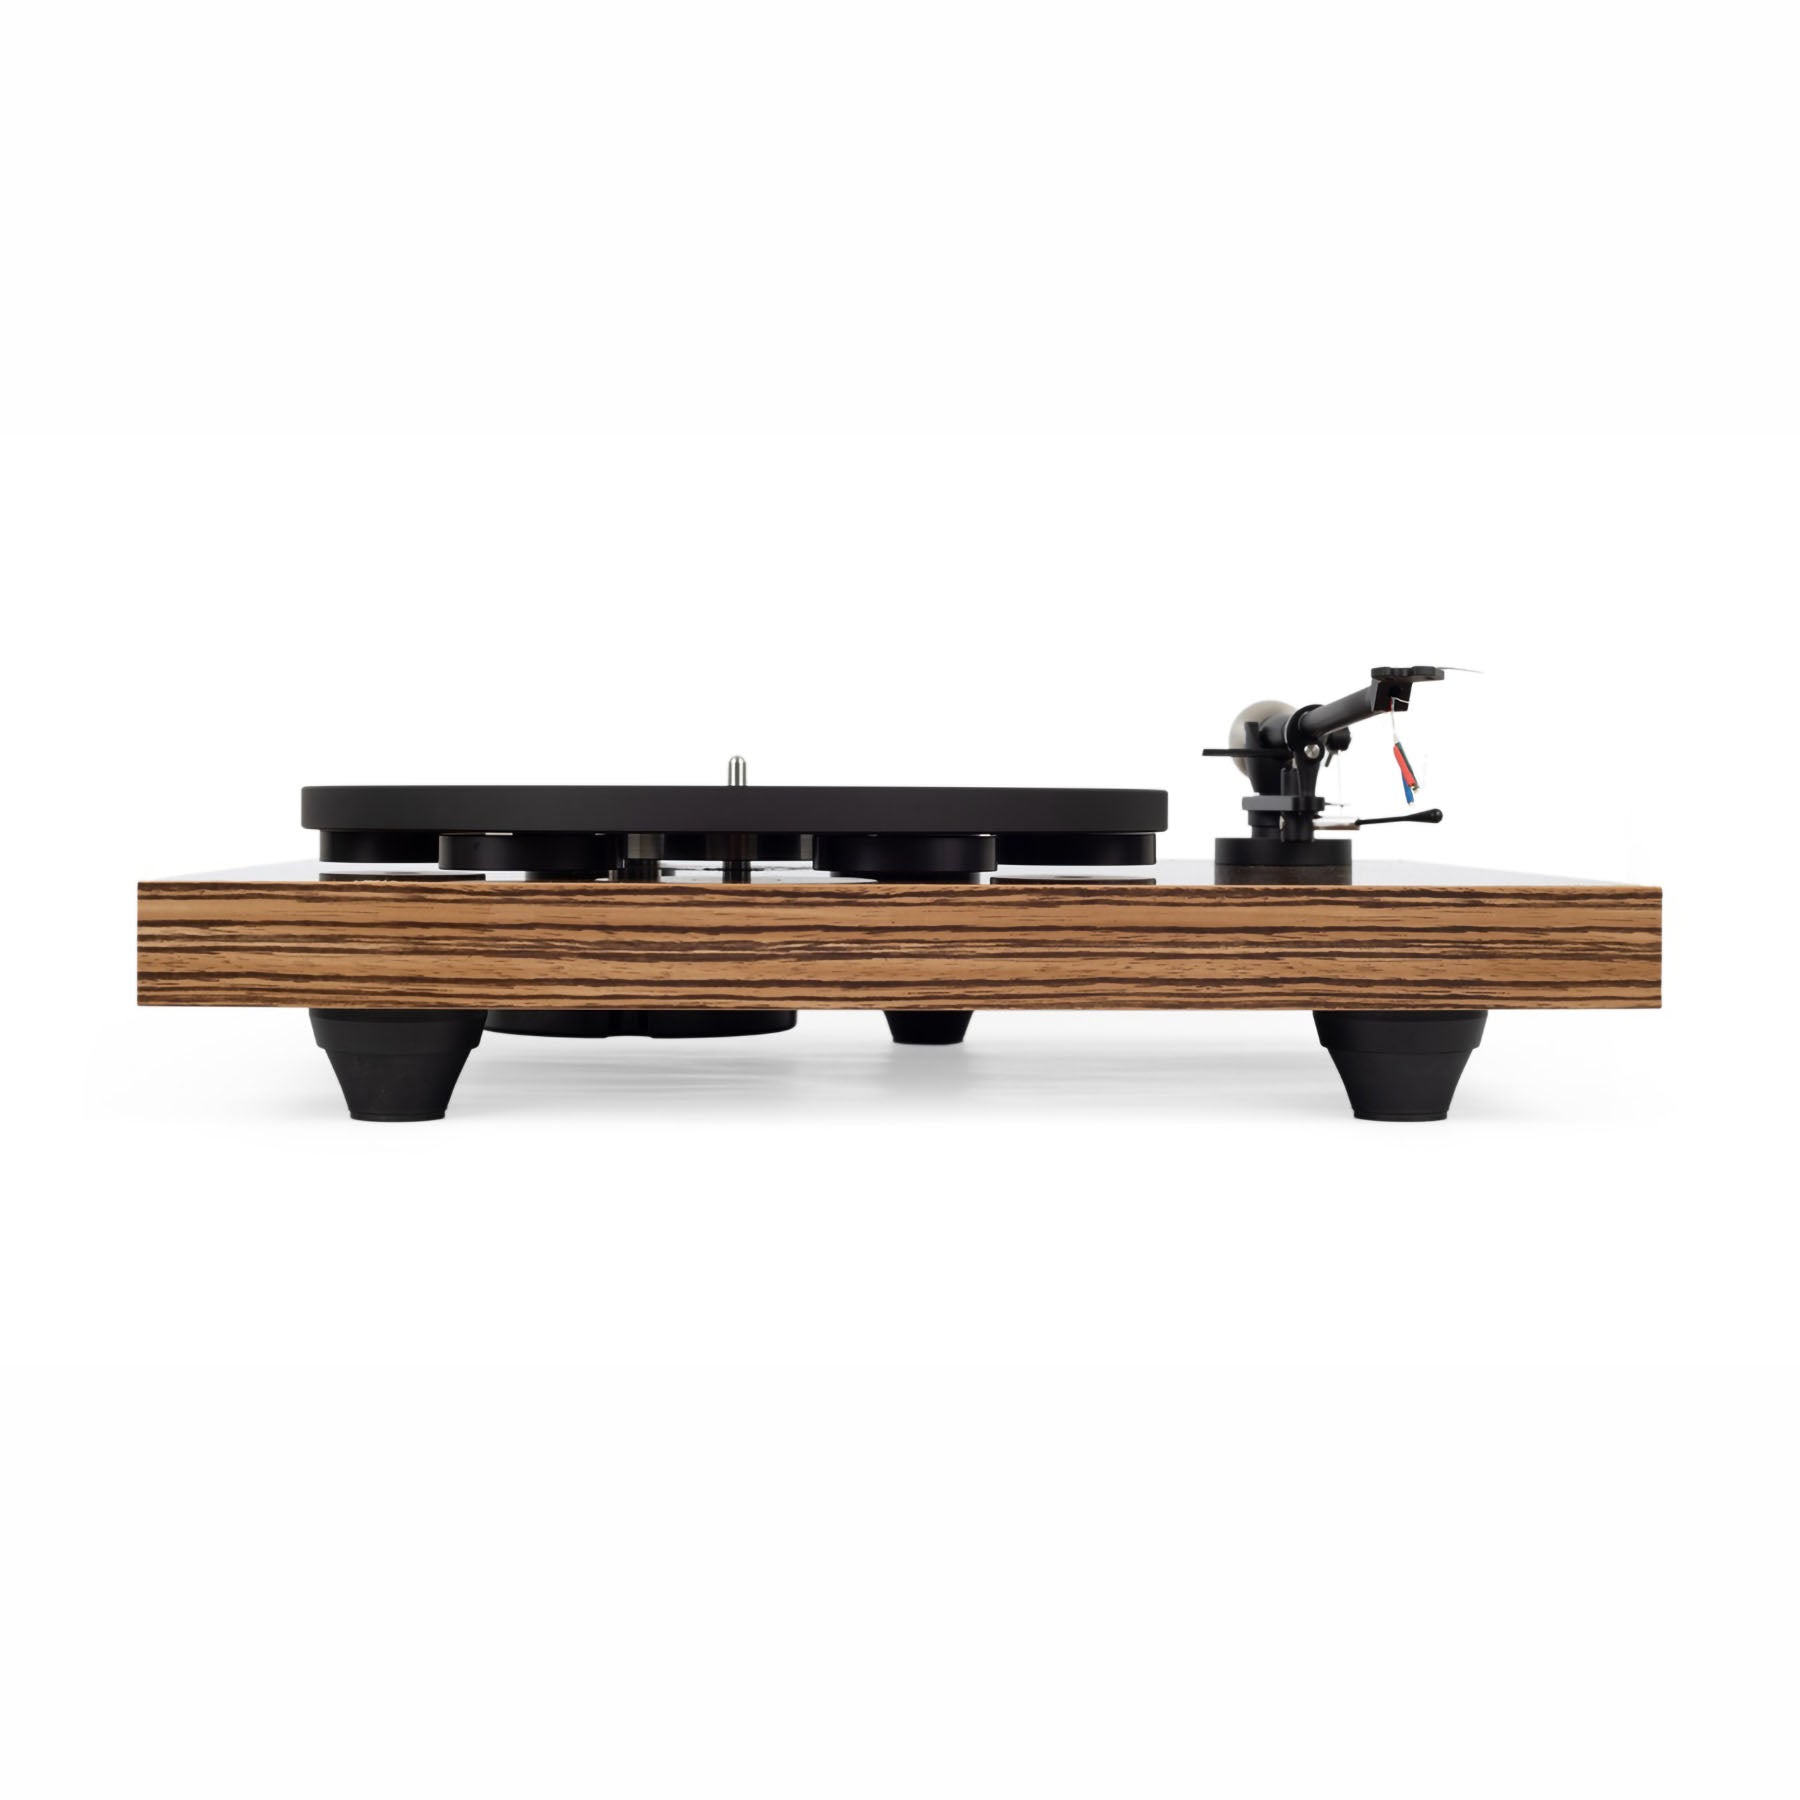 AURIS Classica Turntable with W10 Tonearm